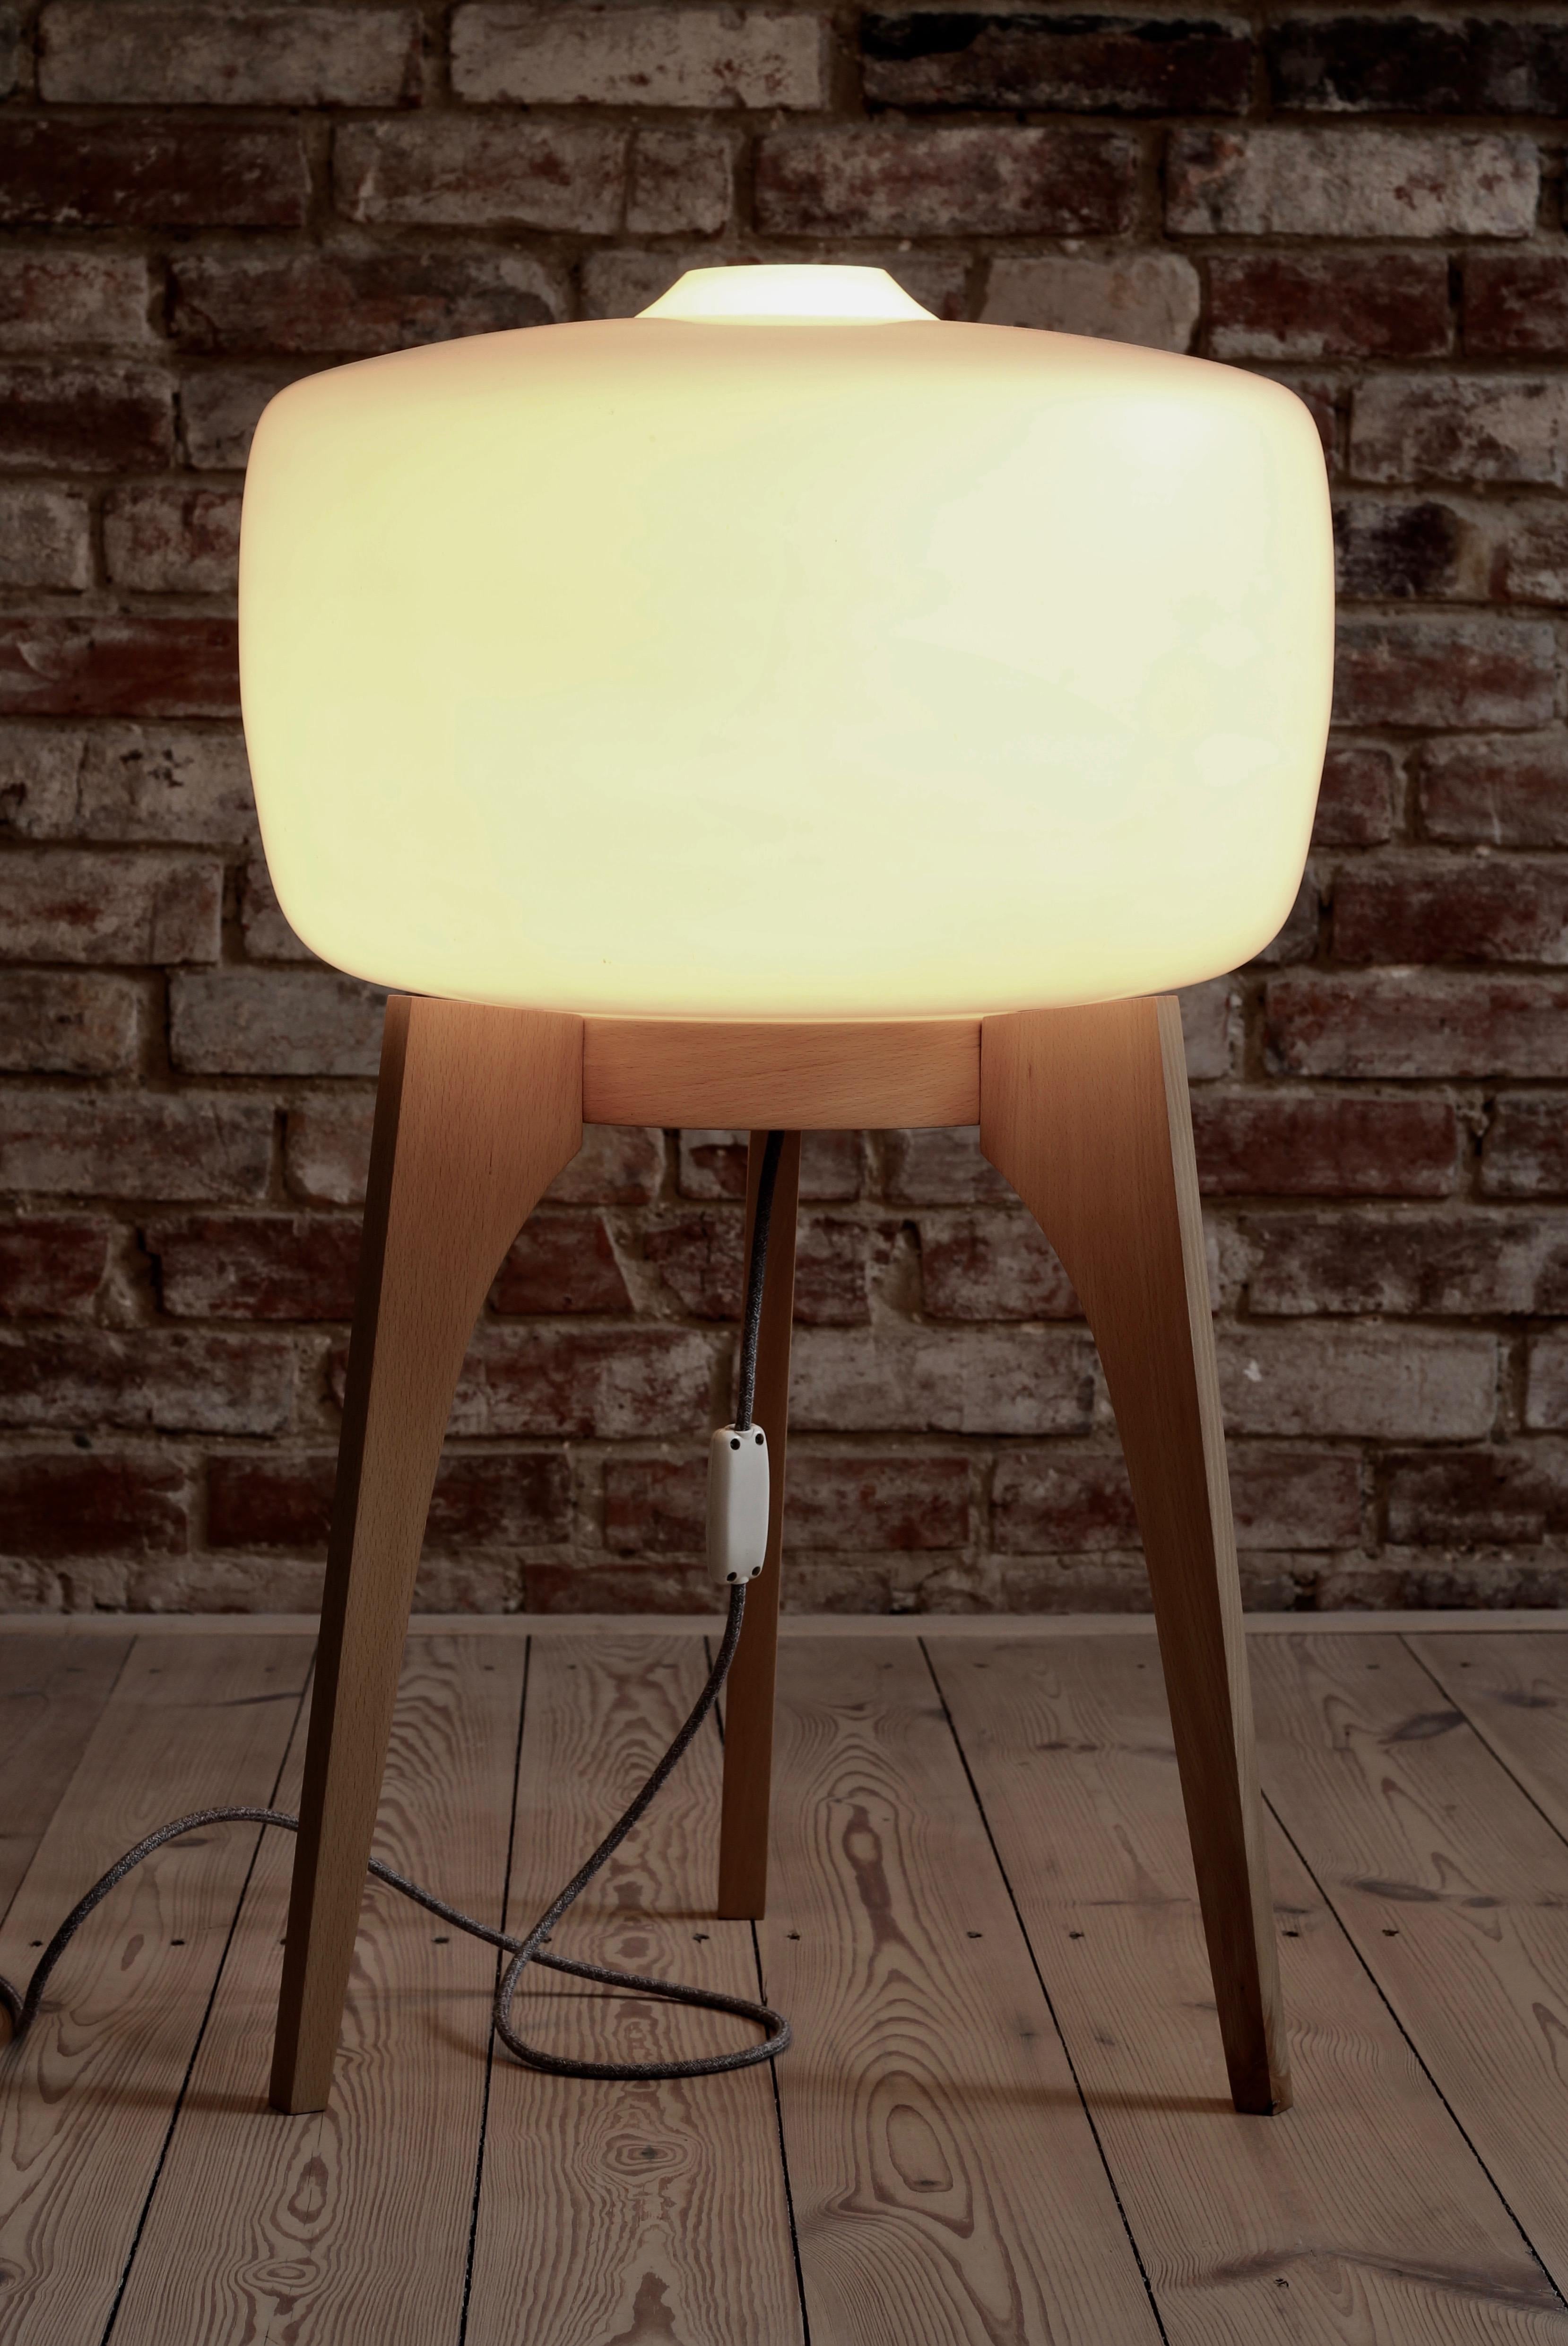 This 1960s floor lamp was made by Czech manufacturer Uluv (Ustredi lidove a umelecke vyroby). It has a large milk-white glass lampshade set on a three wooden legs base. It gives a warm delicate light creating good vibes in the room. The wooden base